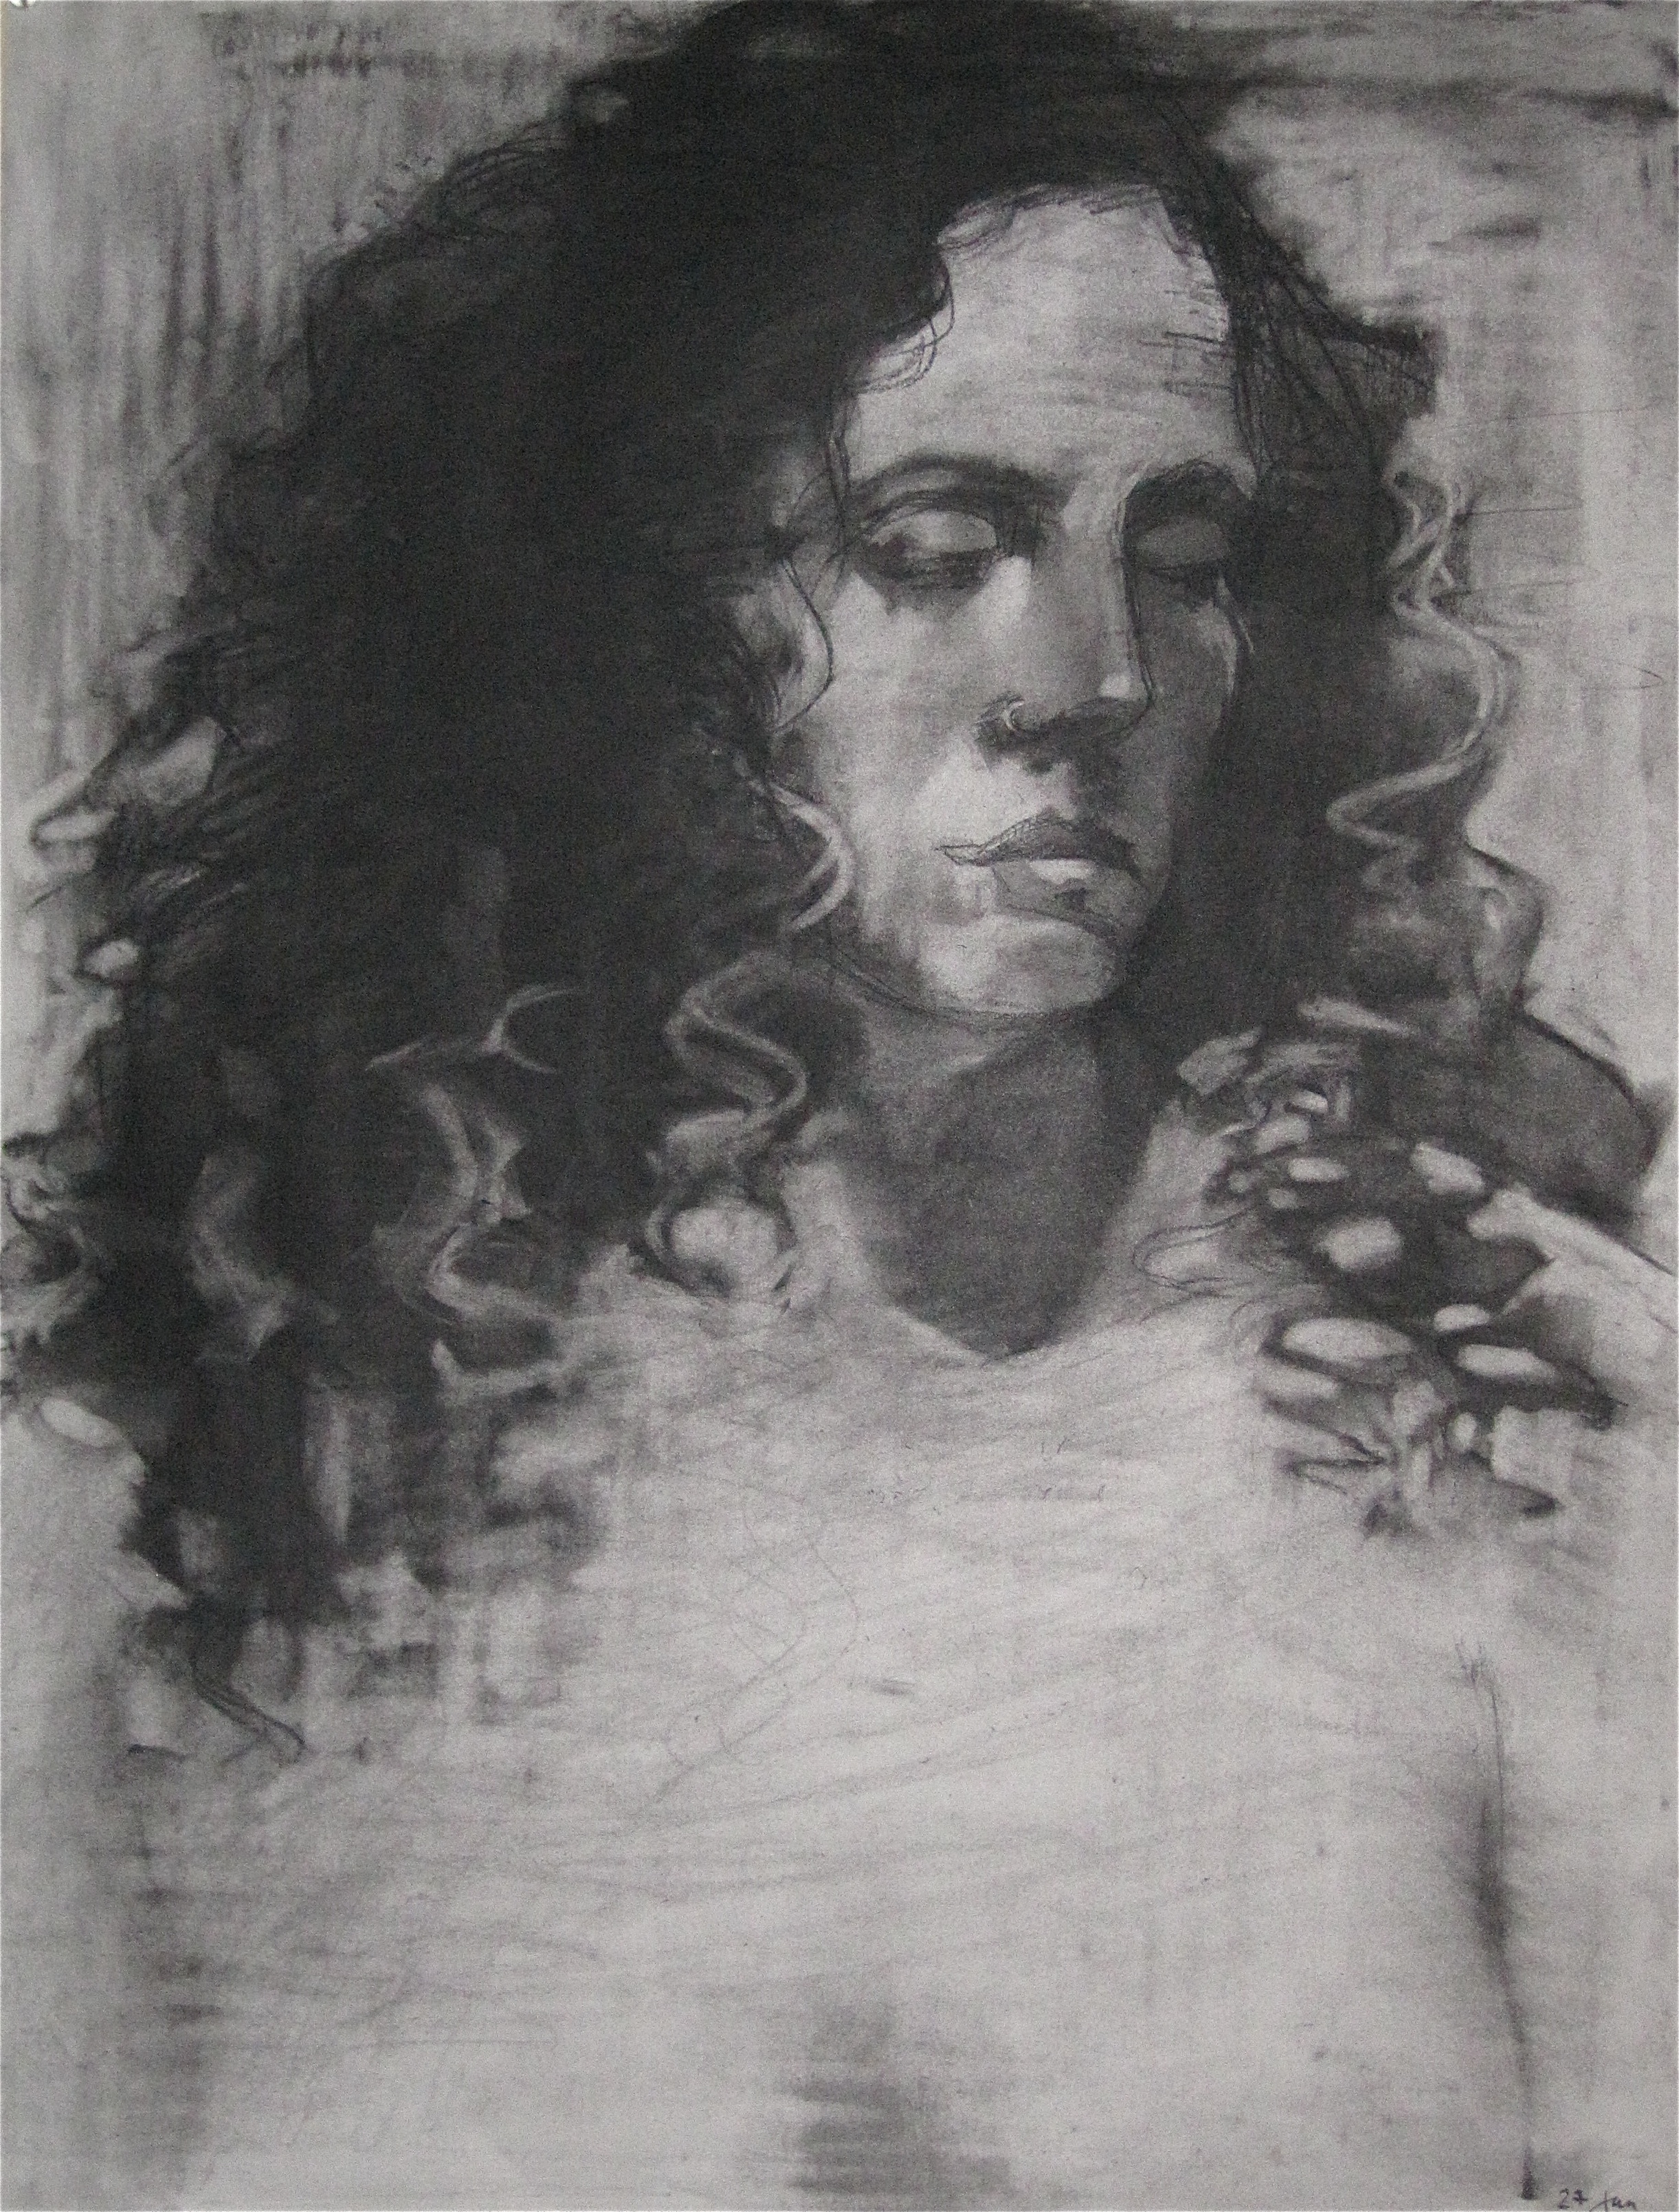  Charcoal on paper  18 x 24" 